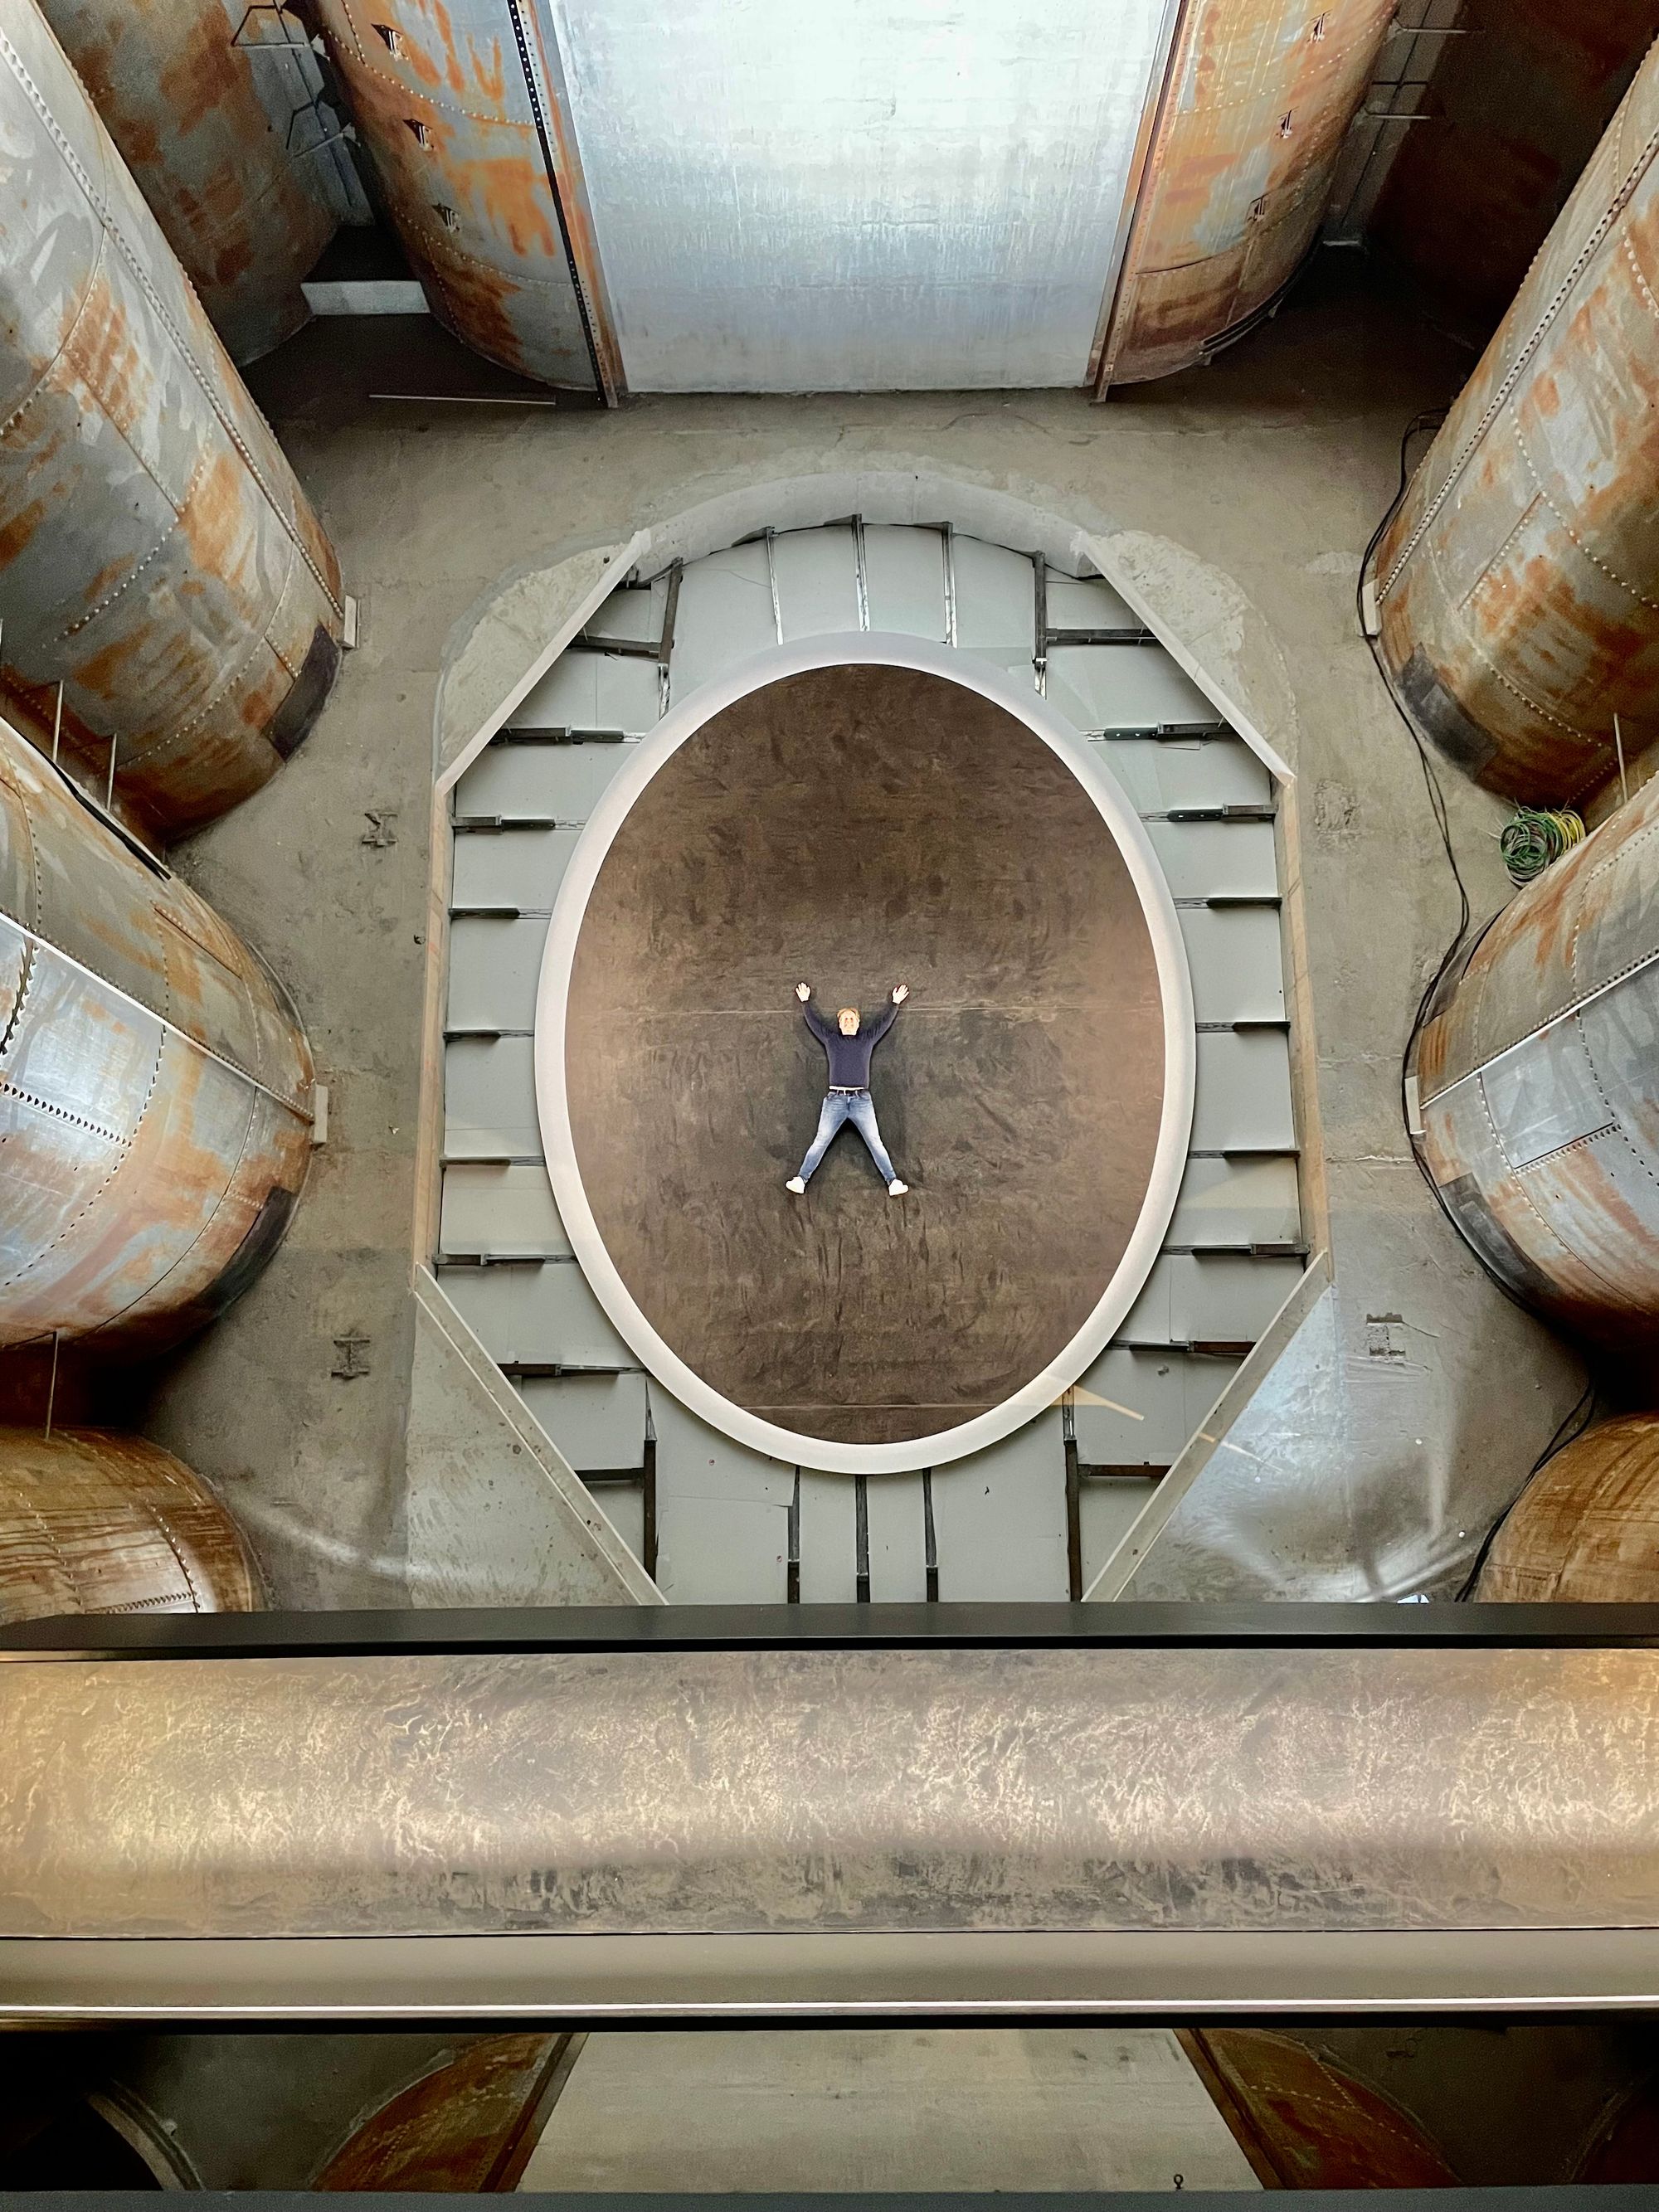 Real silo and human for scale.